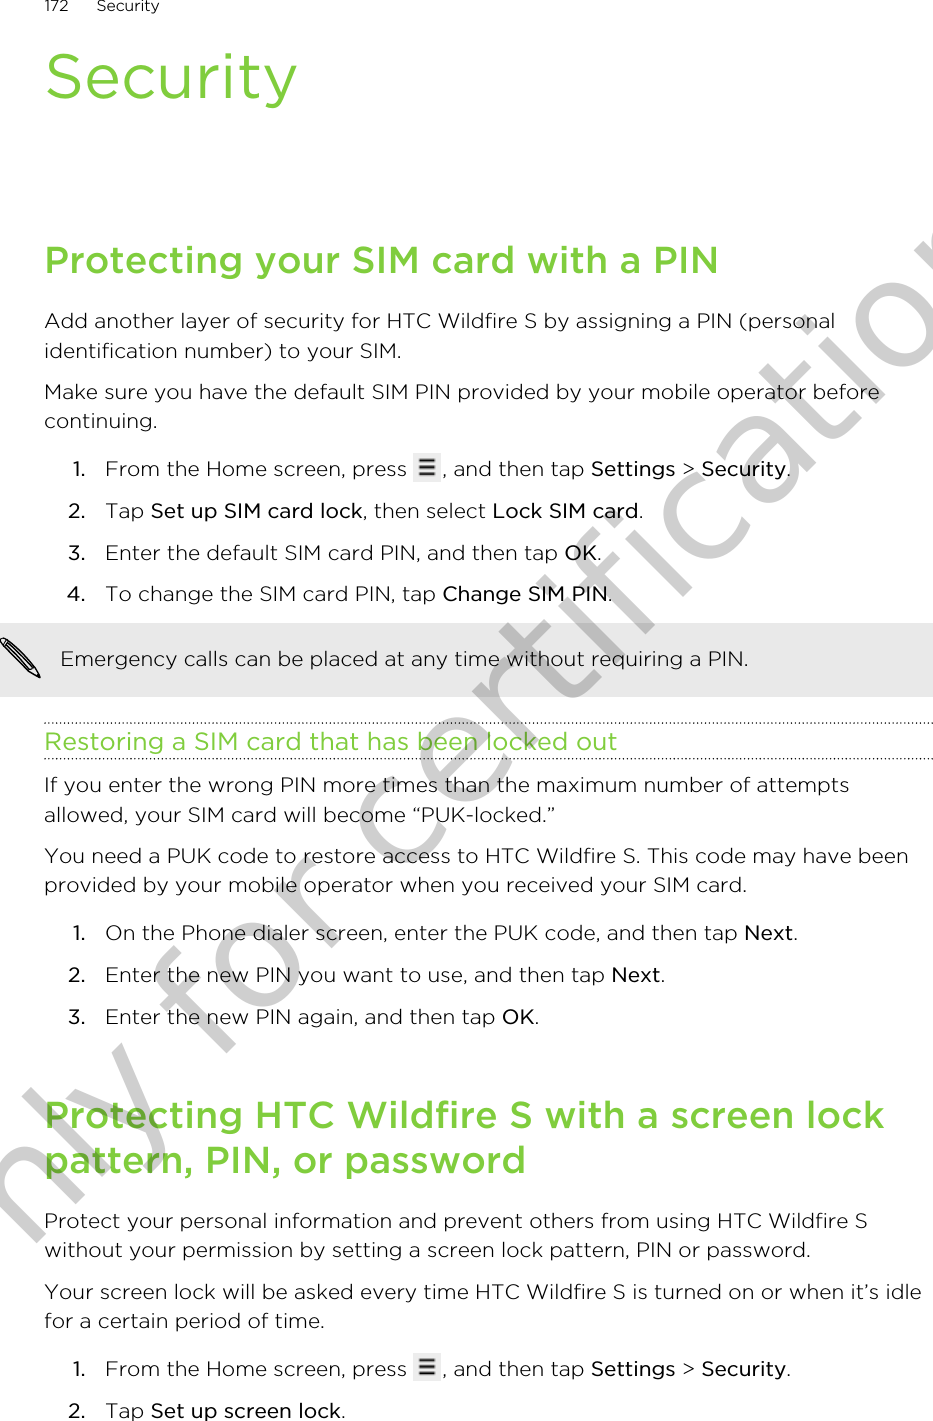 SecurityProtecting your SIM card with a PINAdd another layer of security for HTC Wildfire S by assigning a PIN (personalidentification number) to your SIM.Make sure you have the default SIM PIN provided by your mobile operator beforecontinuing.1. From the Home screen, press  , and then tap Settings &gt; Security.2. Tap Set up SIM card lock, then select Lock SIM card.3. Enter the default SIM card PIN, and then tap OK.4. To change the SIM card PIN, tap Change SIM PIN. Emergency calls can be placed at any time without requiring a PIN.Restoring a SIM card that has been locked outIf you enter the wrong PIN more times than the maximum number of attemptsallowed, your SIM card will become “PUK-locked.”You need a PUK code to restore access to HTC Wildfire S. This code may have beenprovided by your mobile operator when you received your SIM card.1. On the Phone dialer screen, enter the PUK code, and then tap Next.2. Enter the new PIN you want to use, and then tap Next.3. Enter the new PIN again, and then tap OK.Protecting HTC Wildfire S with a screen lockpattern, PIN, or passwordProtect your personal information and prevent others from using HTC Wildfire Swithout your permission by setting a screen lock pattern, PIN or password.Your screen lock will be asked every time HTC Wildfire S is turned on or when it’s idlefor a certain period of time.1. From the Home screen, press  , and then tap Settings &gt; Security.2. Tap Set up screen lock.172 SecurityOnly for certification